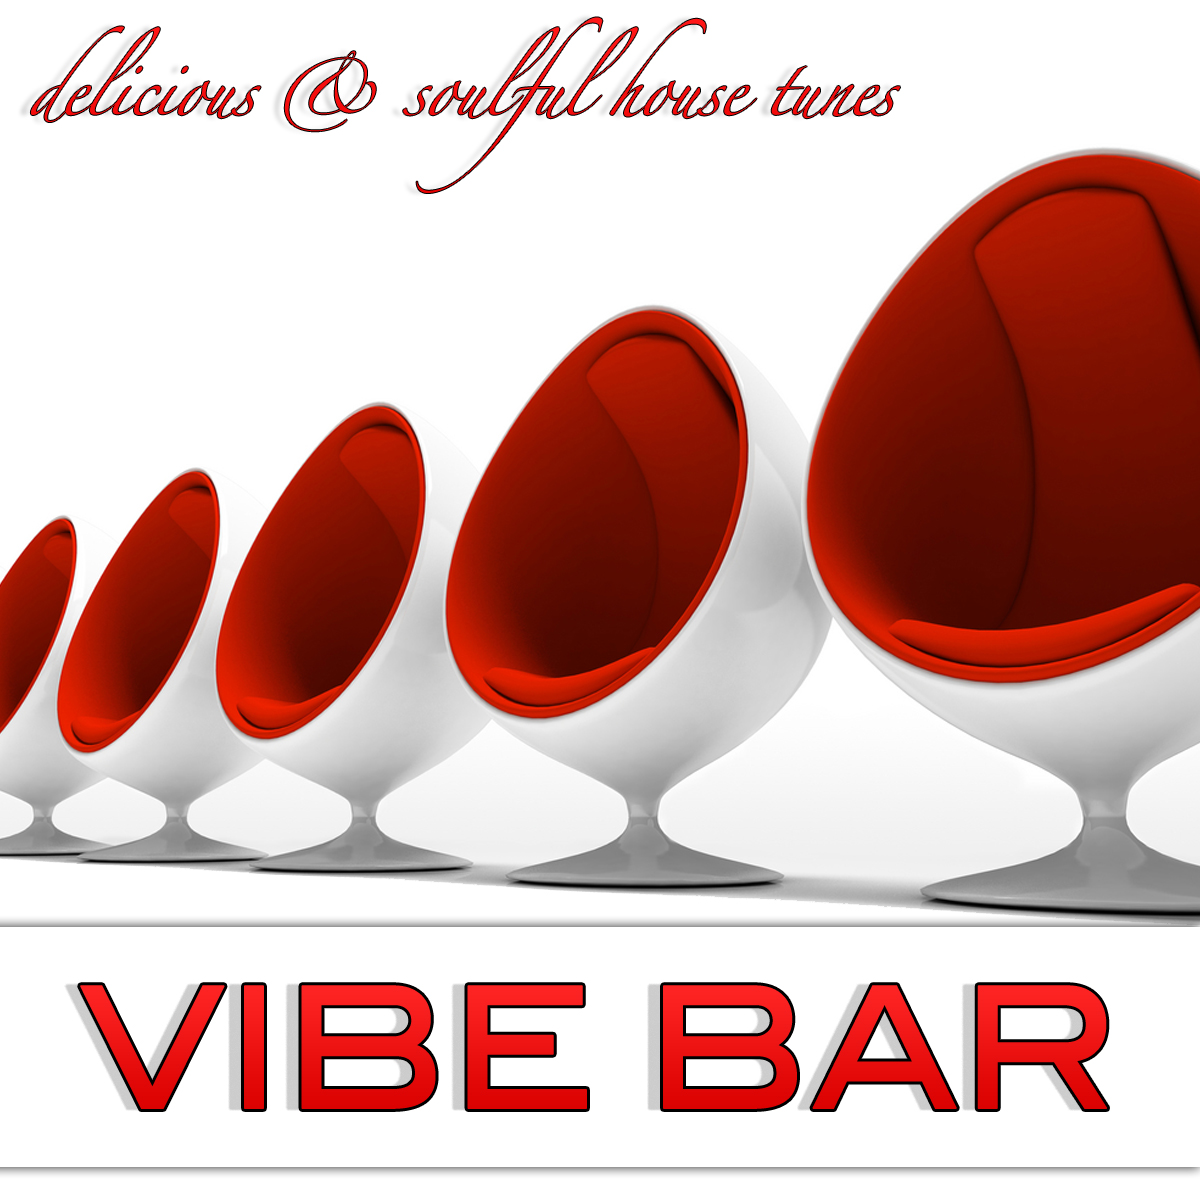 Vibe Bar - Delicious & Soulful House Tunes